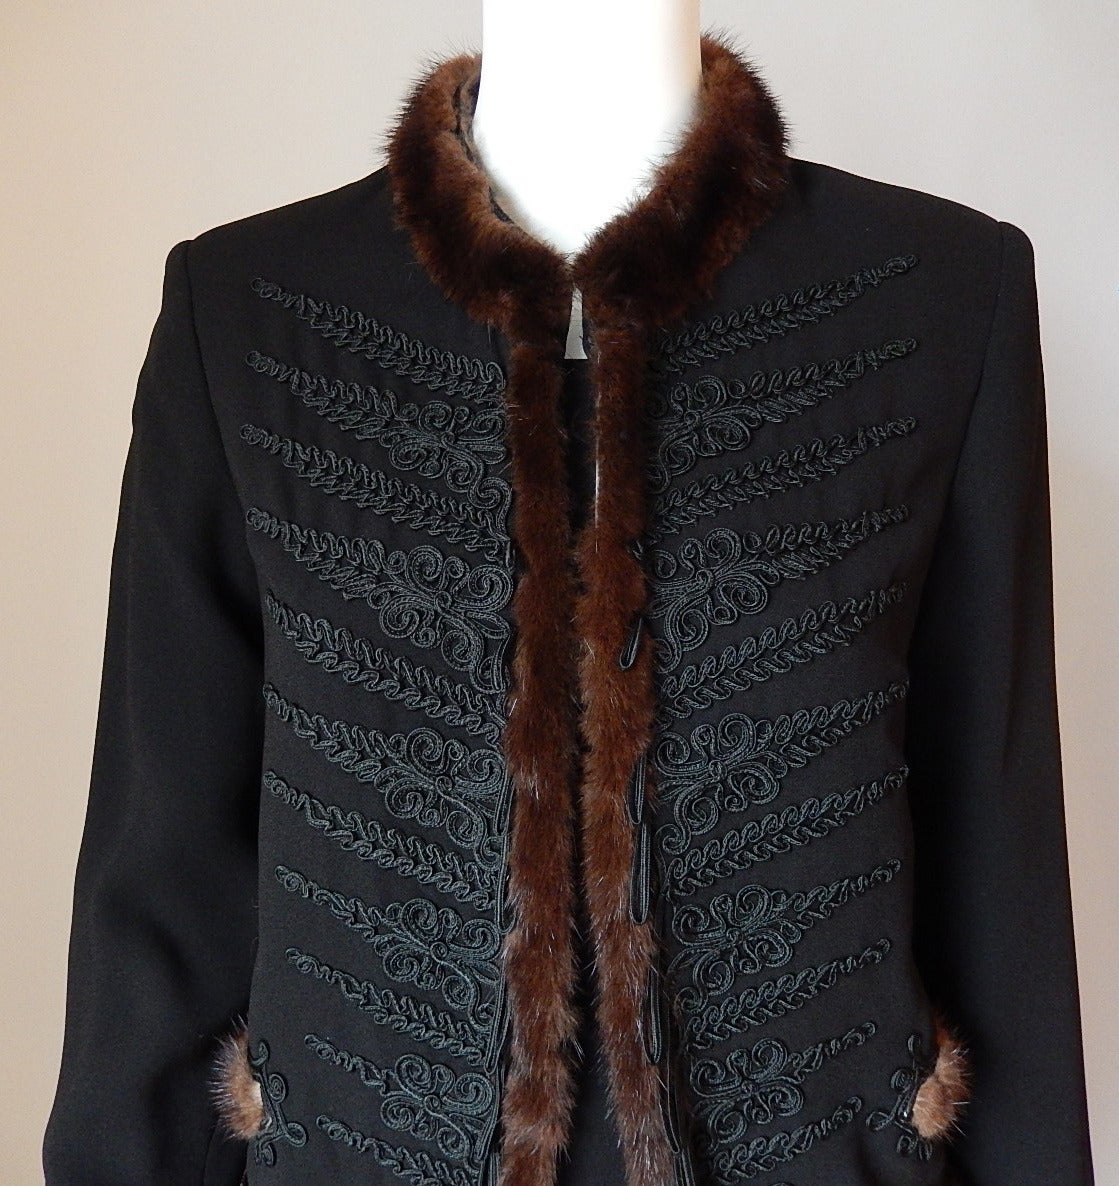 Jean Paul Gaultier Black Jacket
Embroidery stitching with black loops which gradually enlarge as they cascade down the brown mink front panels
Mink fur on collar, fake front pockets, cuffs and bottom of jacket
Large woven material button closures